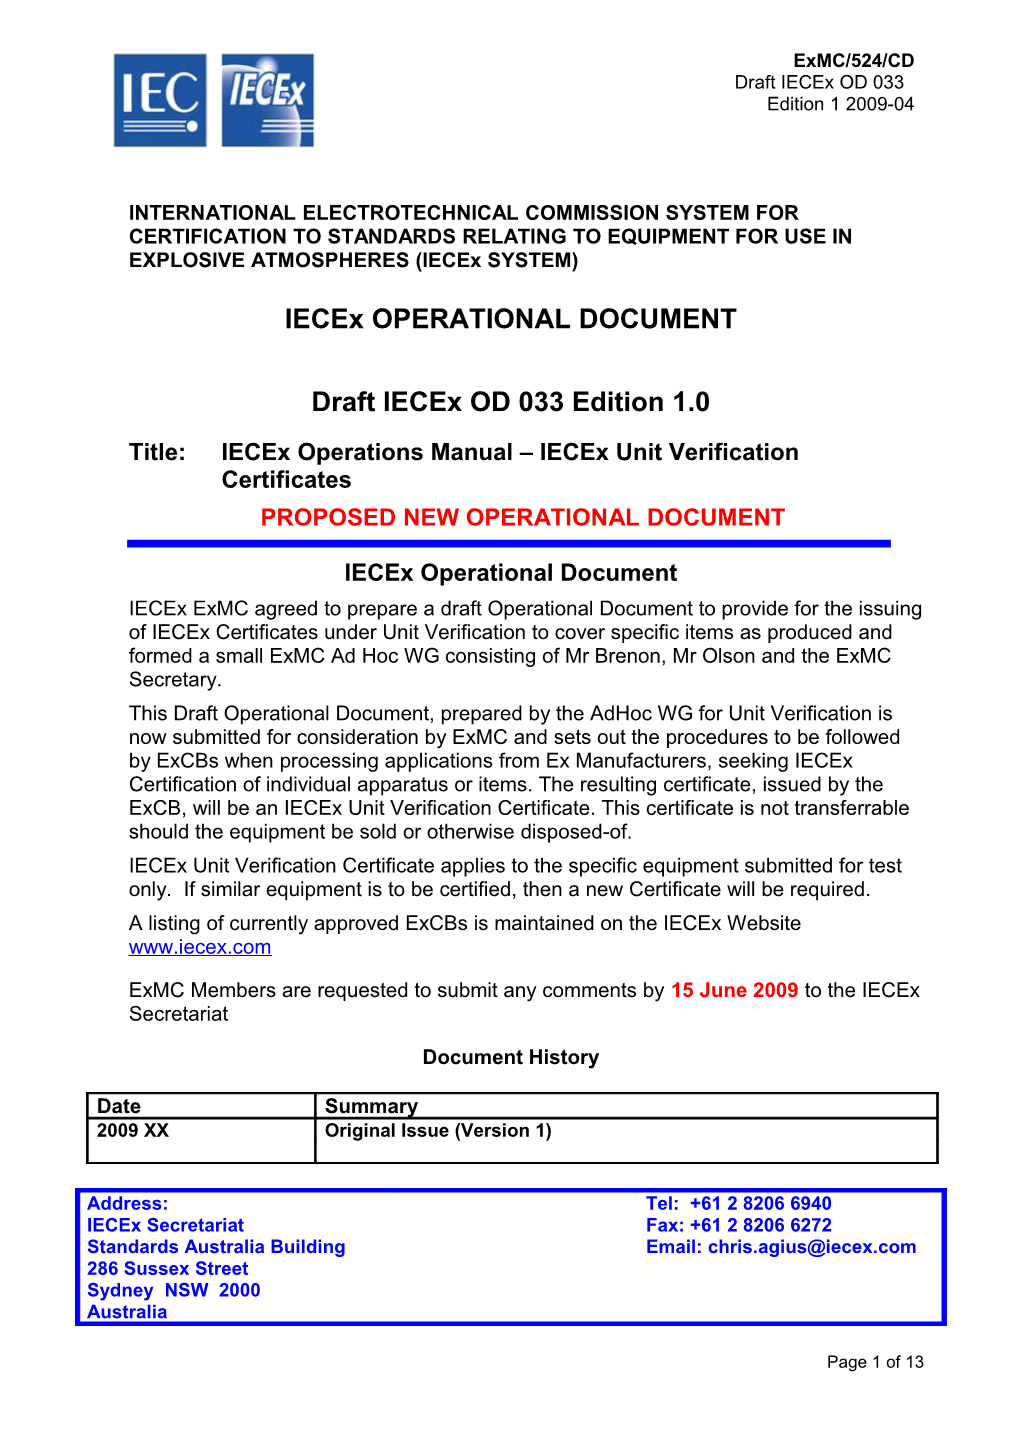 Title:Iecex Operations Manual Iecex Unit Verification Certificates